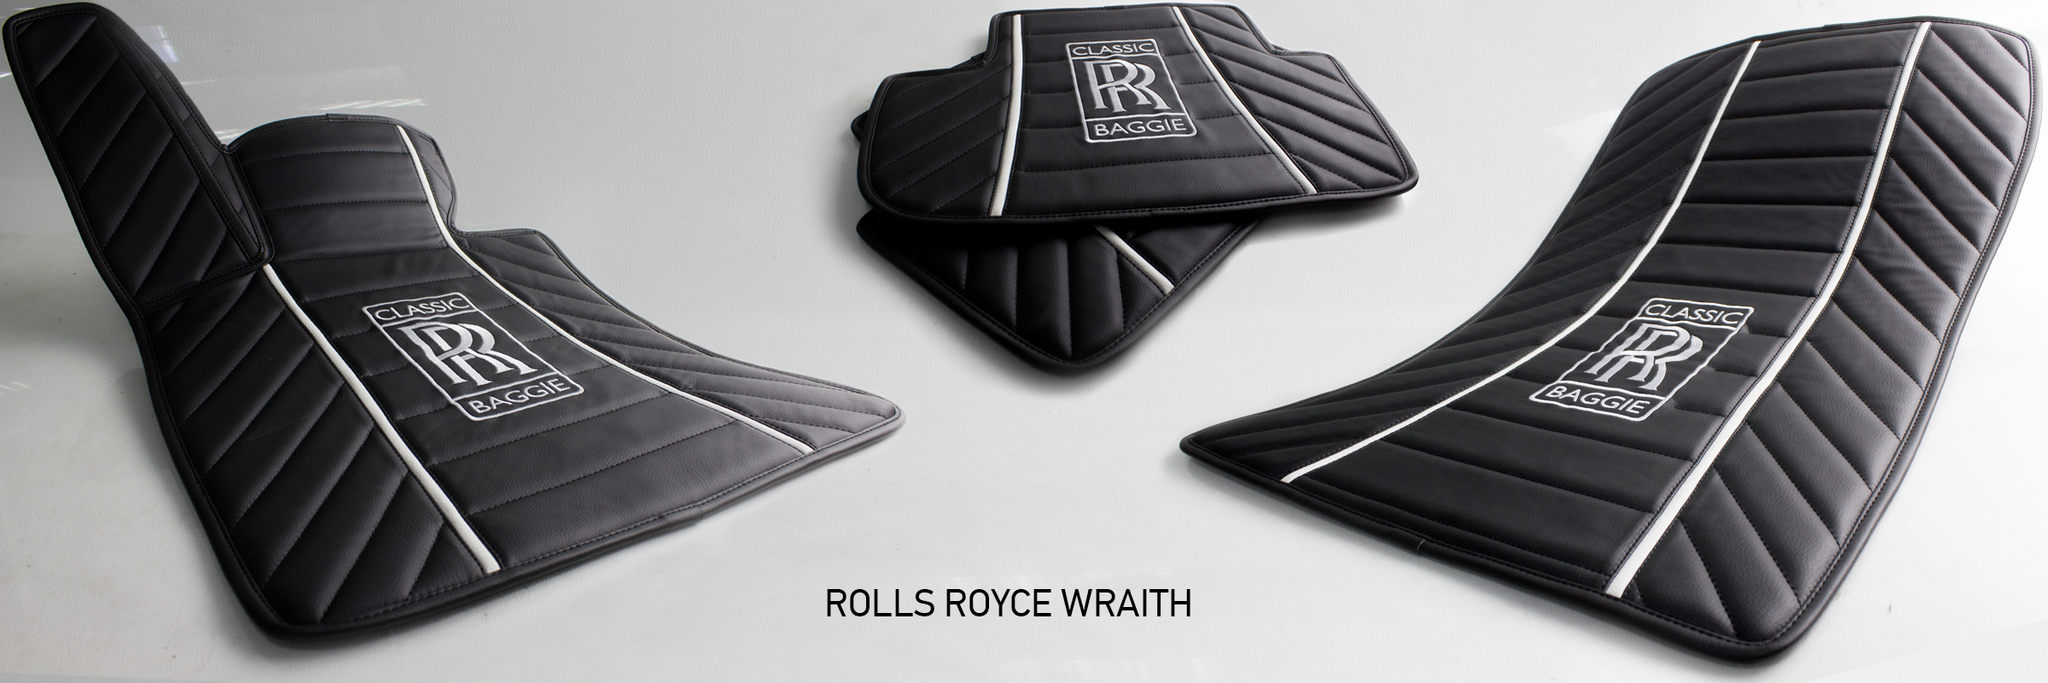 images-products-1-666-232989338-ROLLS_ROYCE_WRAITHD.jpg